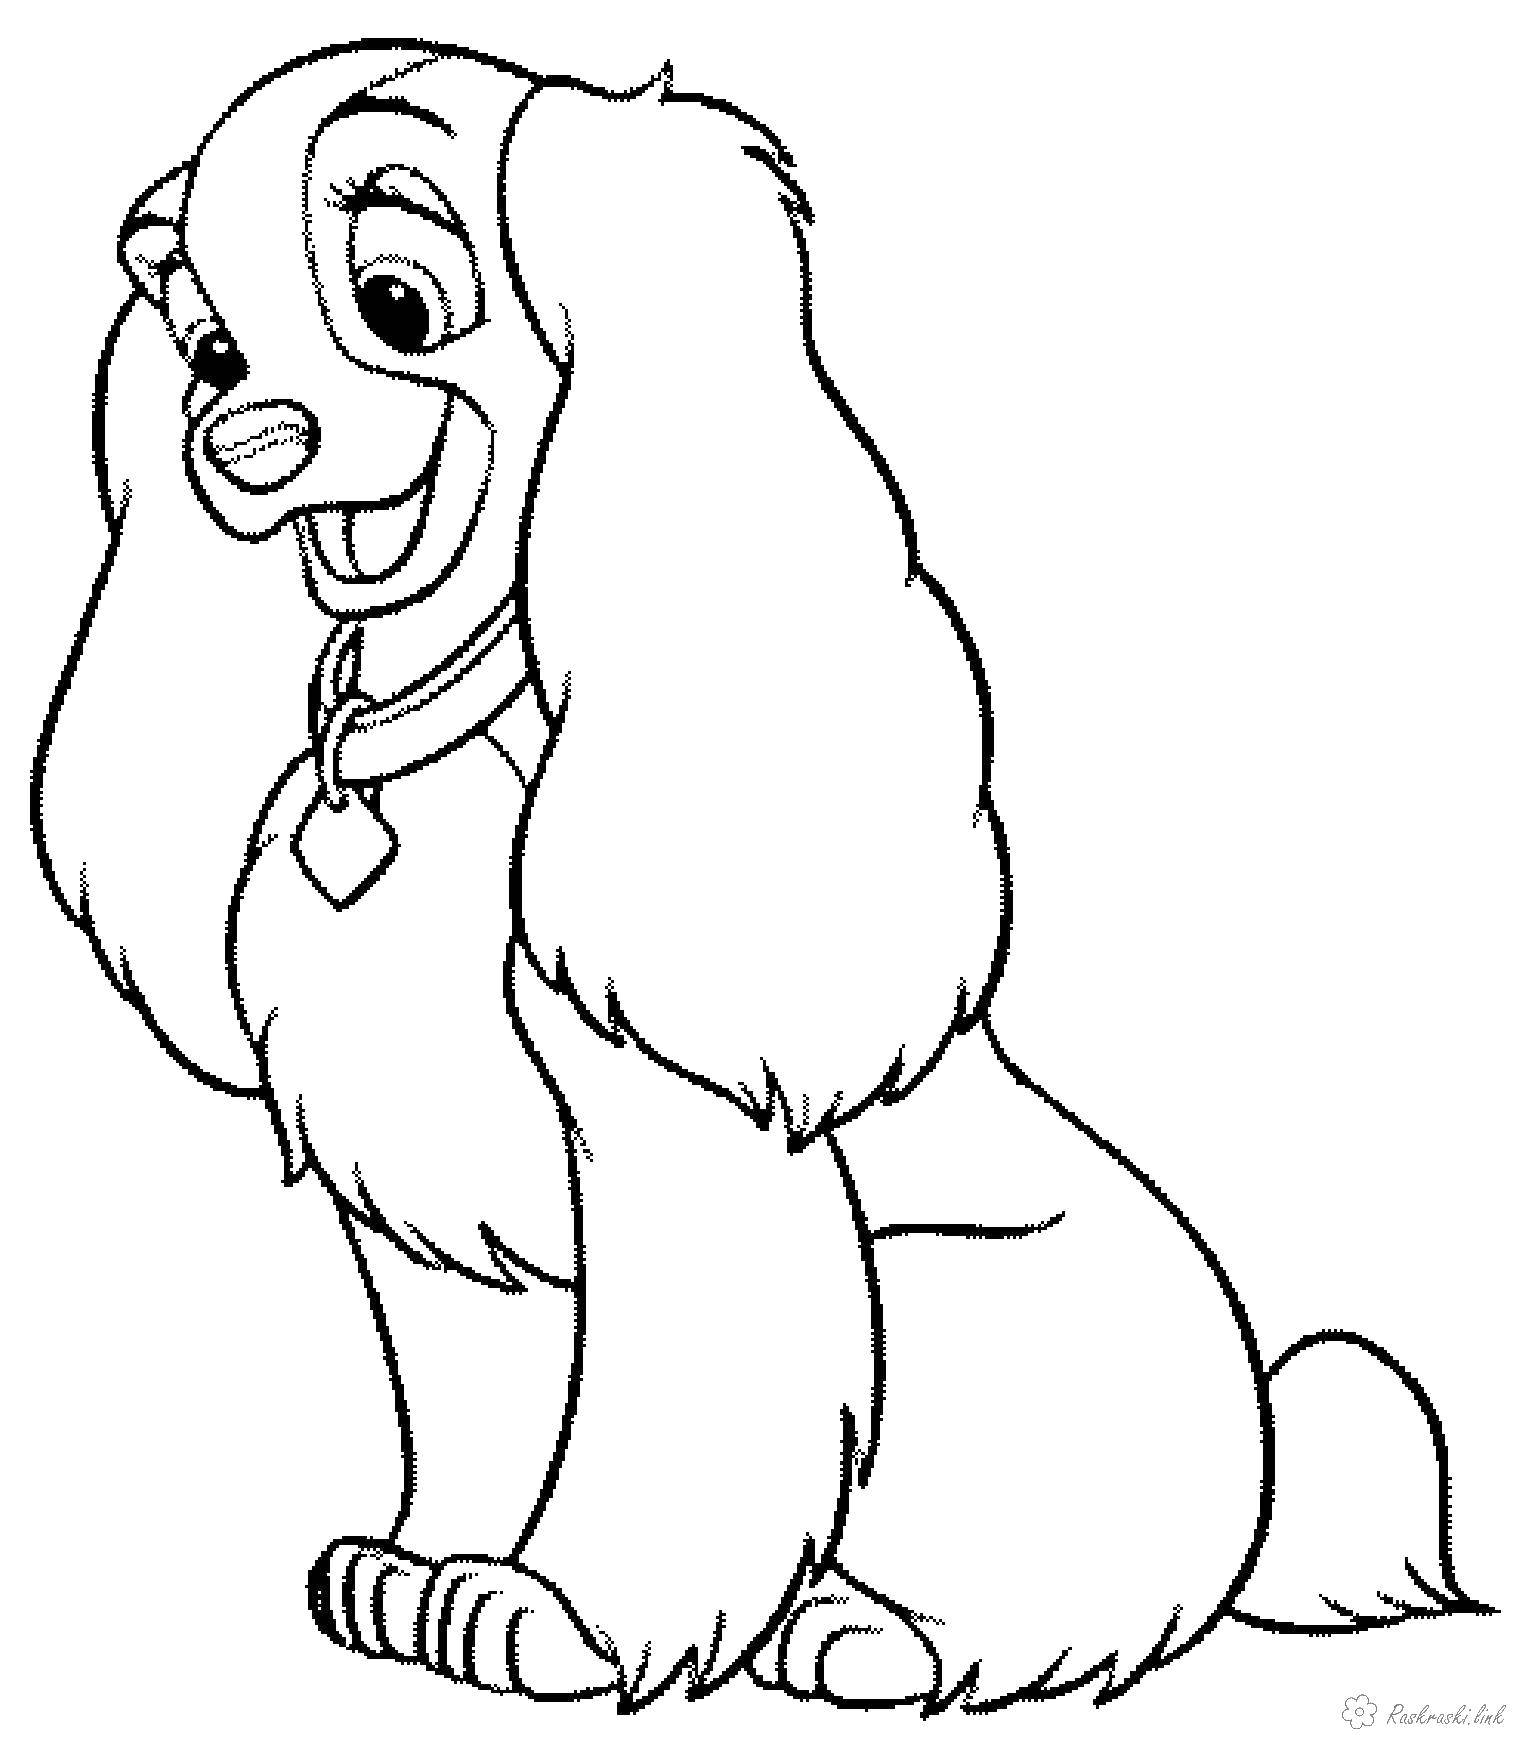 Coloring Lady. Category cartoons. Tags:  lady and the tramp.